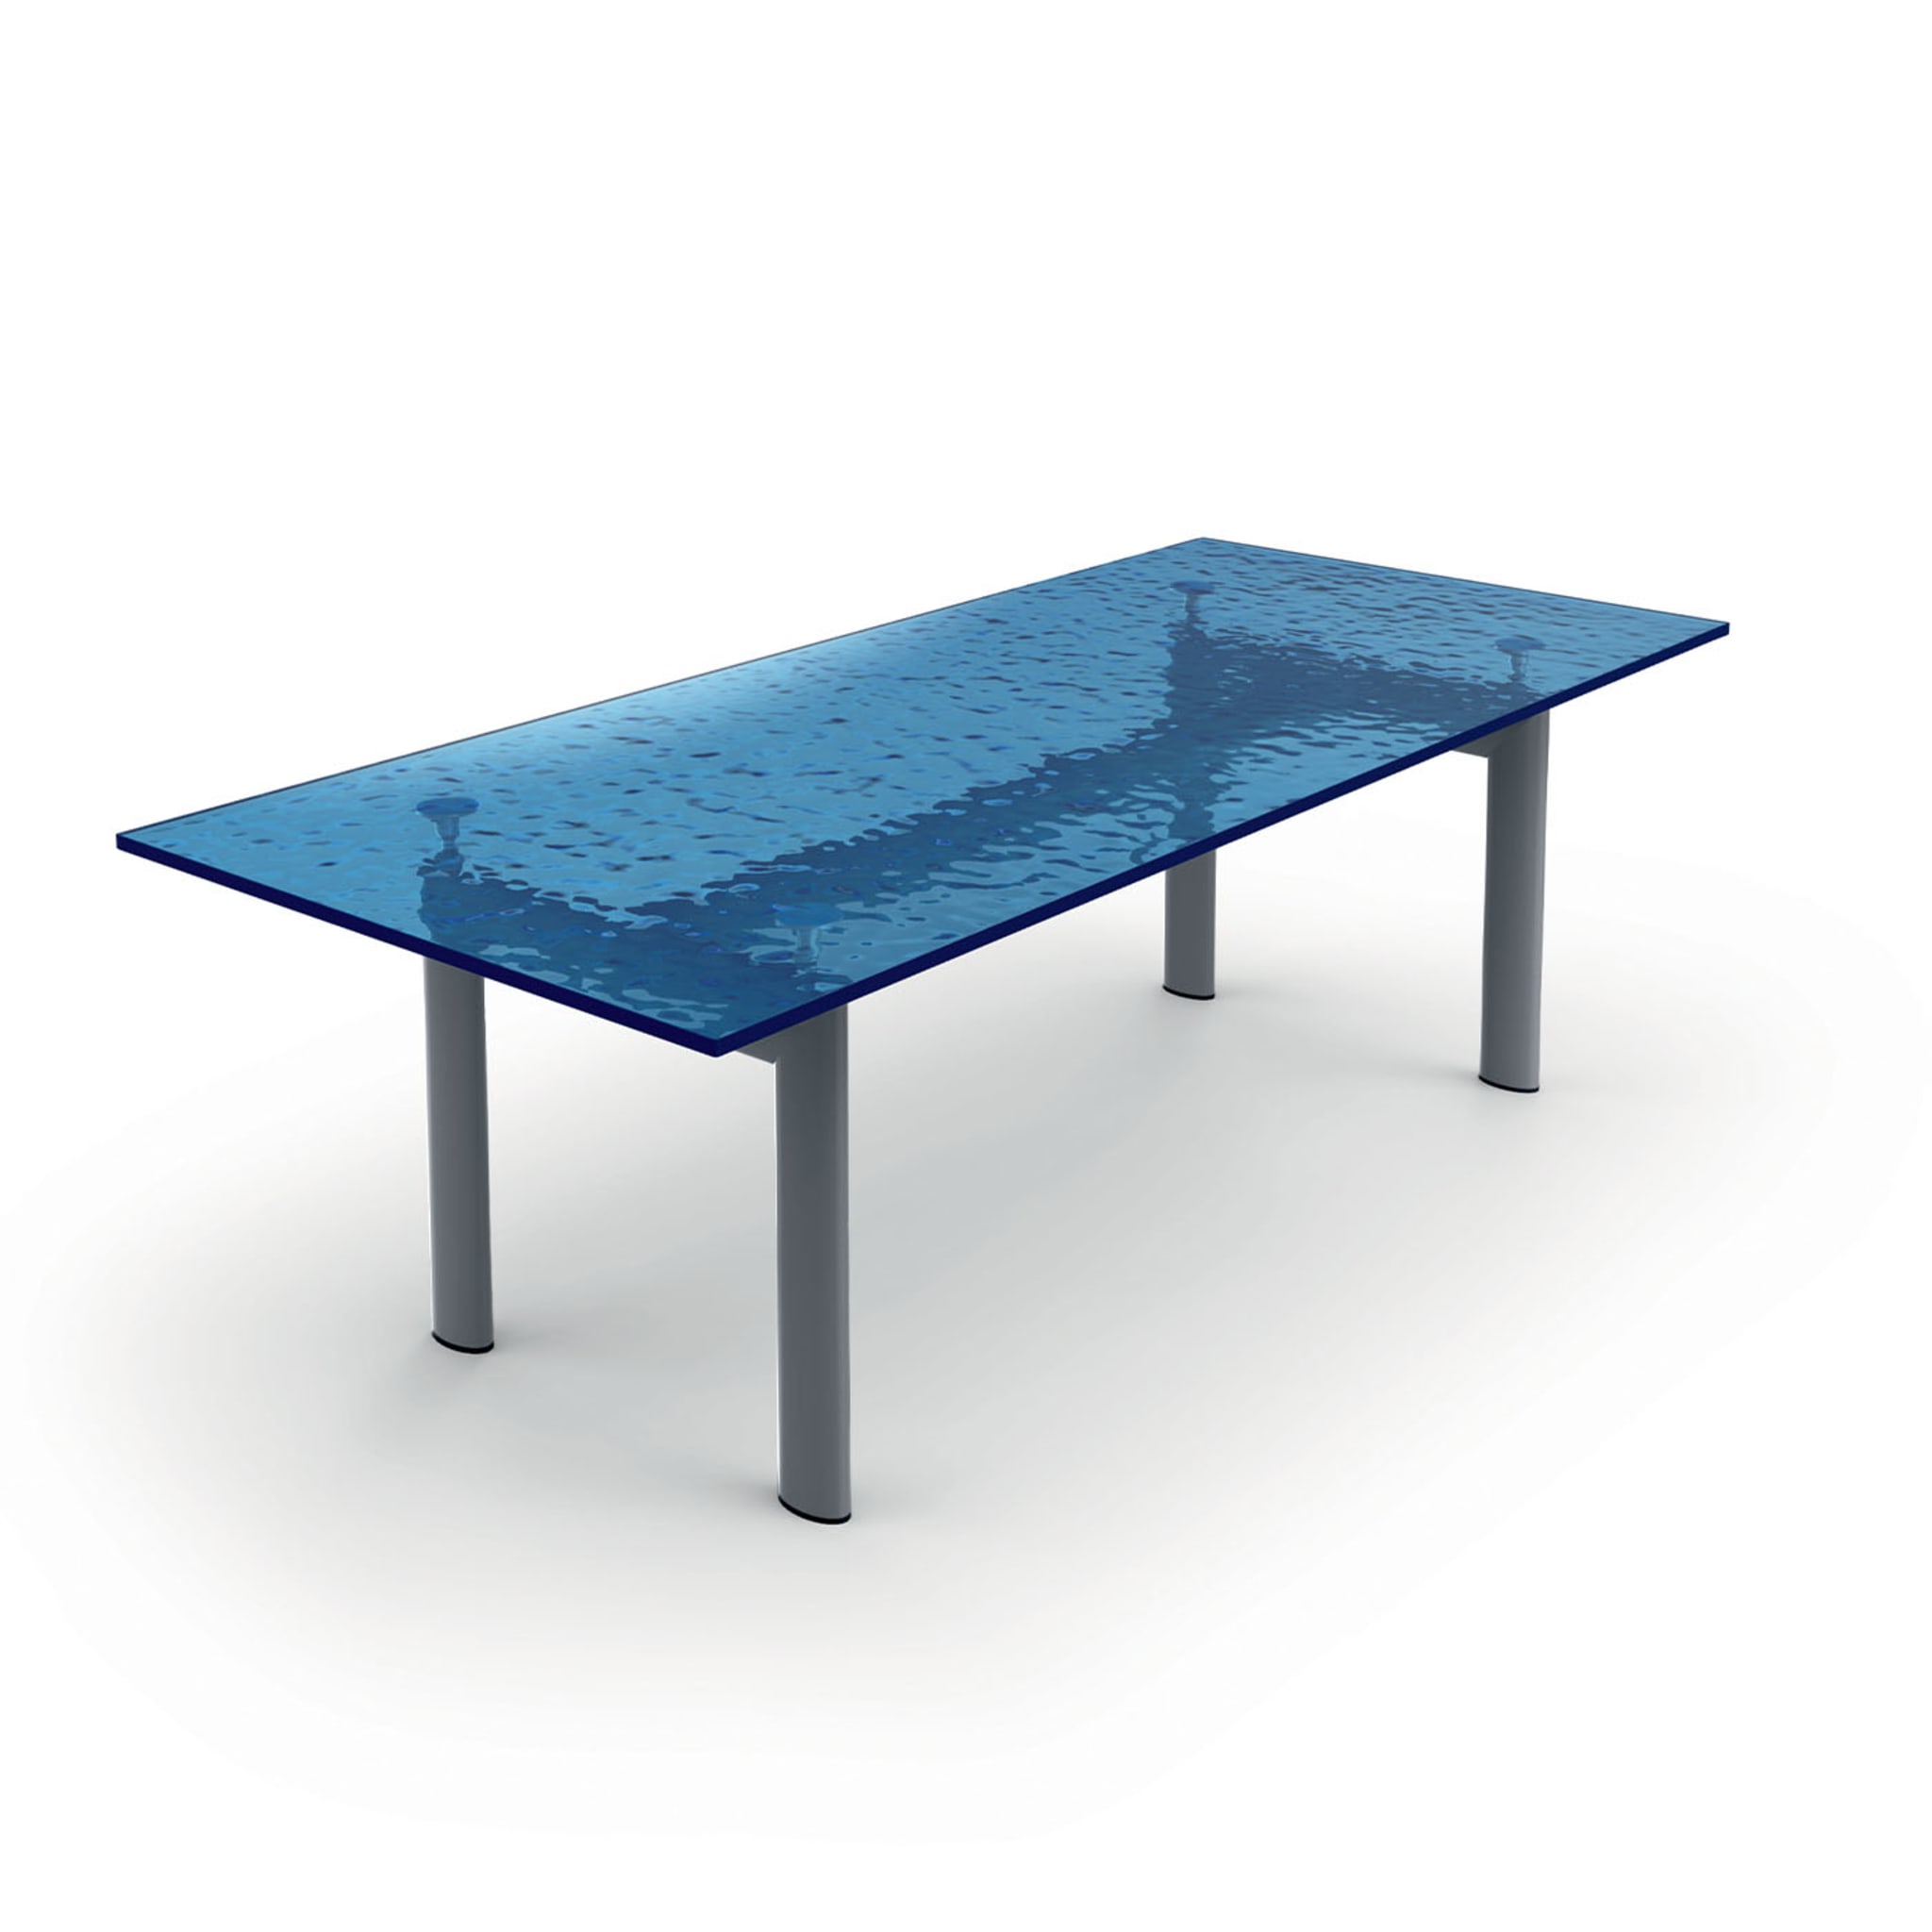 6 Table Tube D’Avion #2 Blue, by Le Corbusier/Jeanneret/Perriand - Alternative view 2